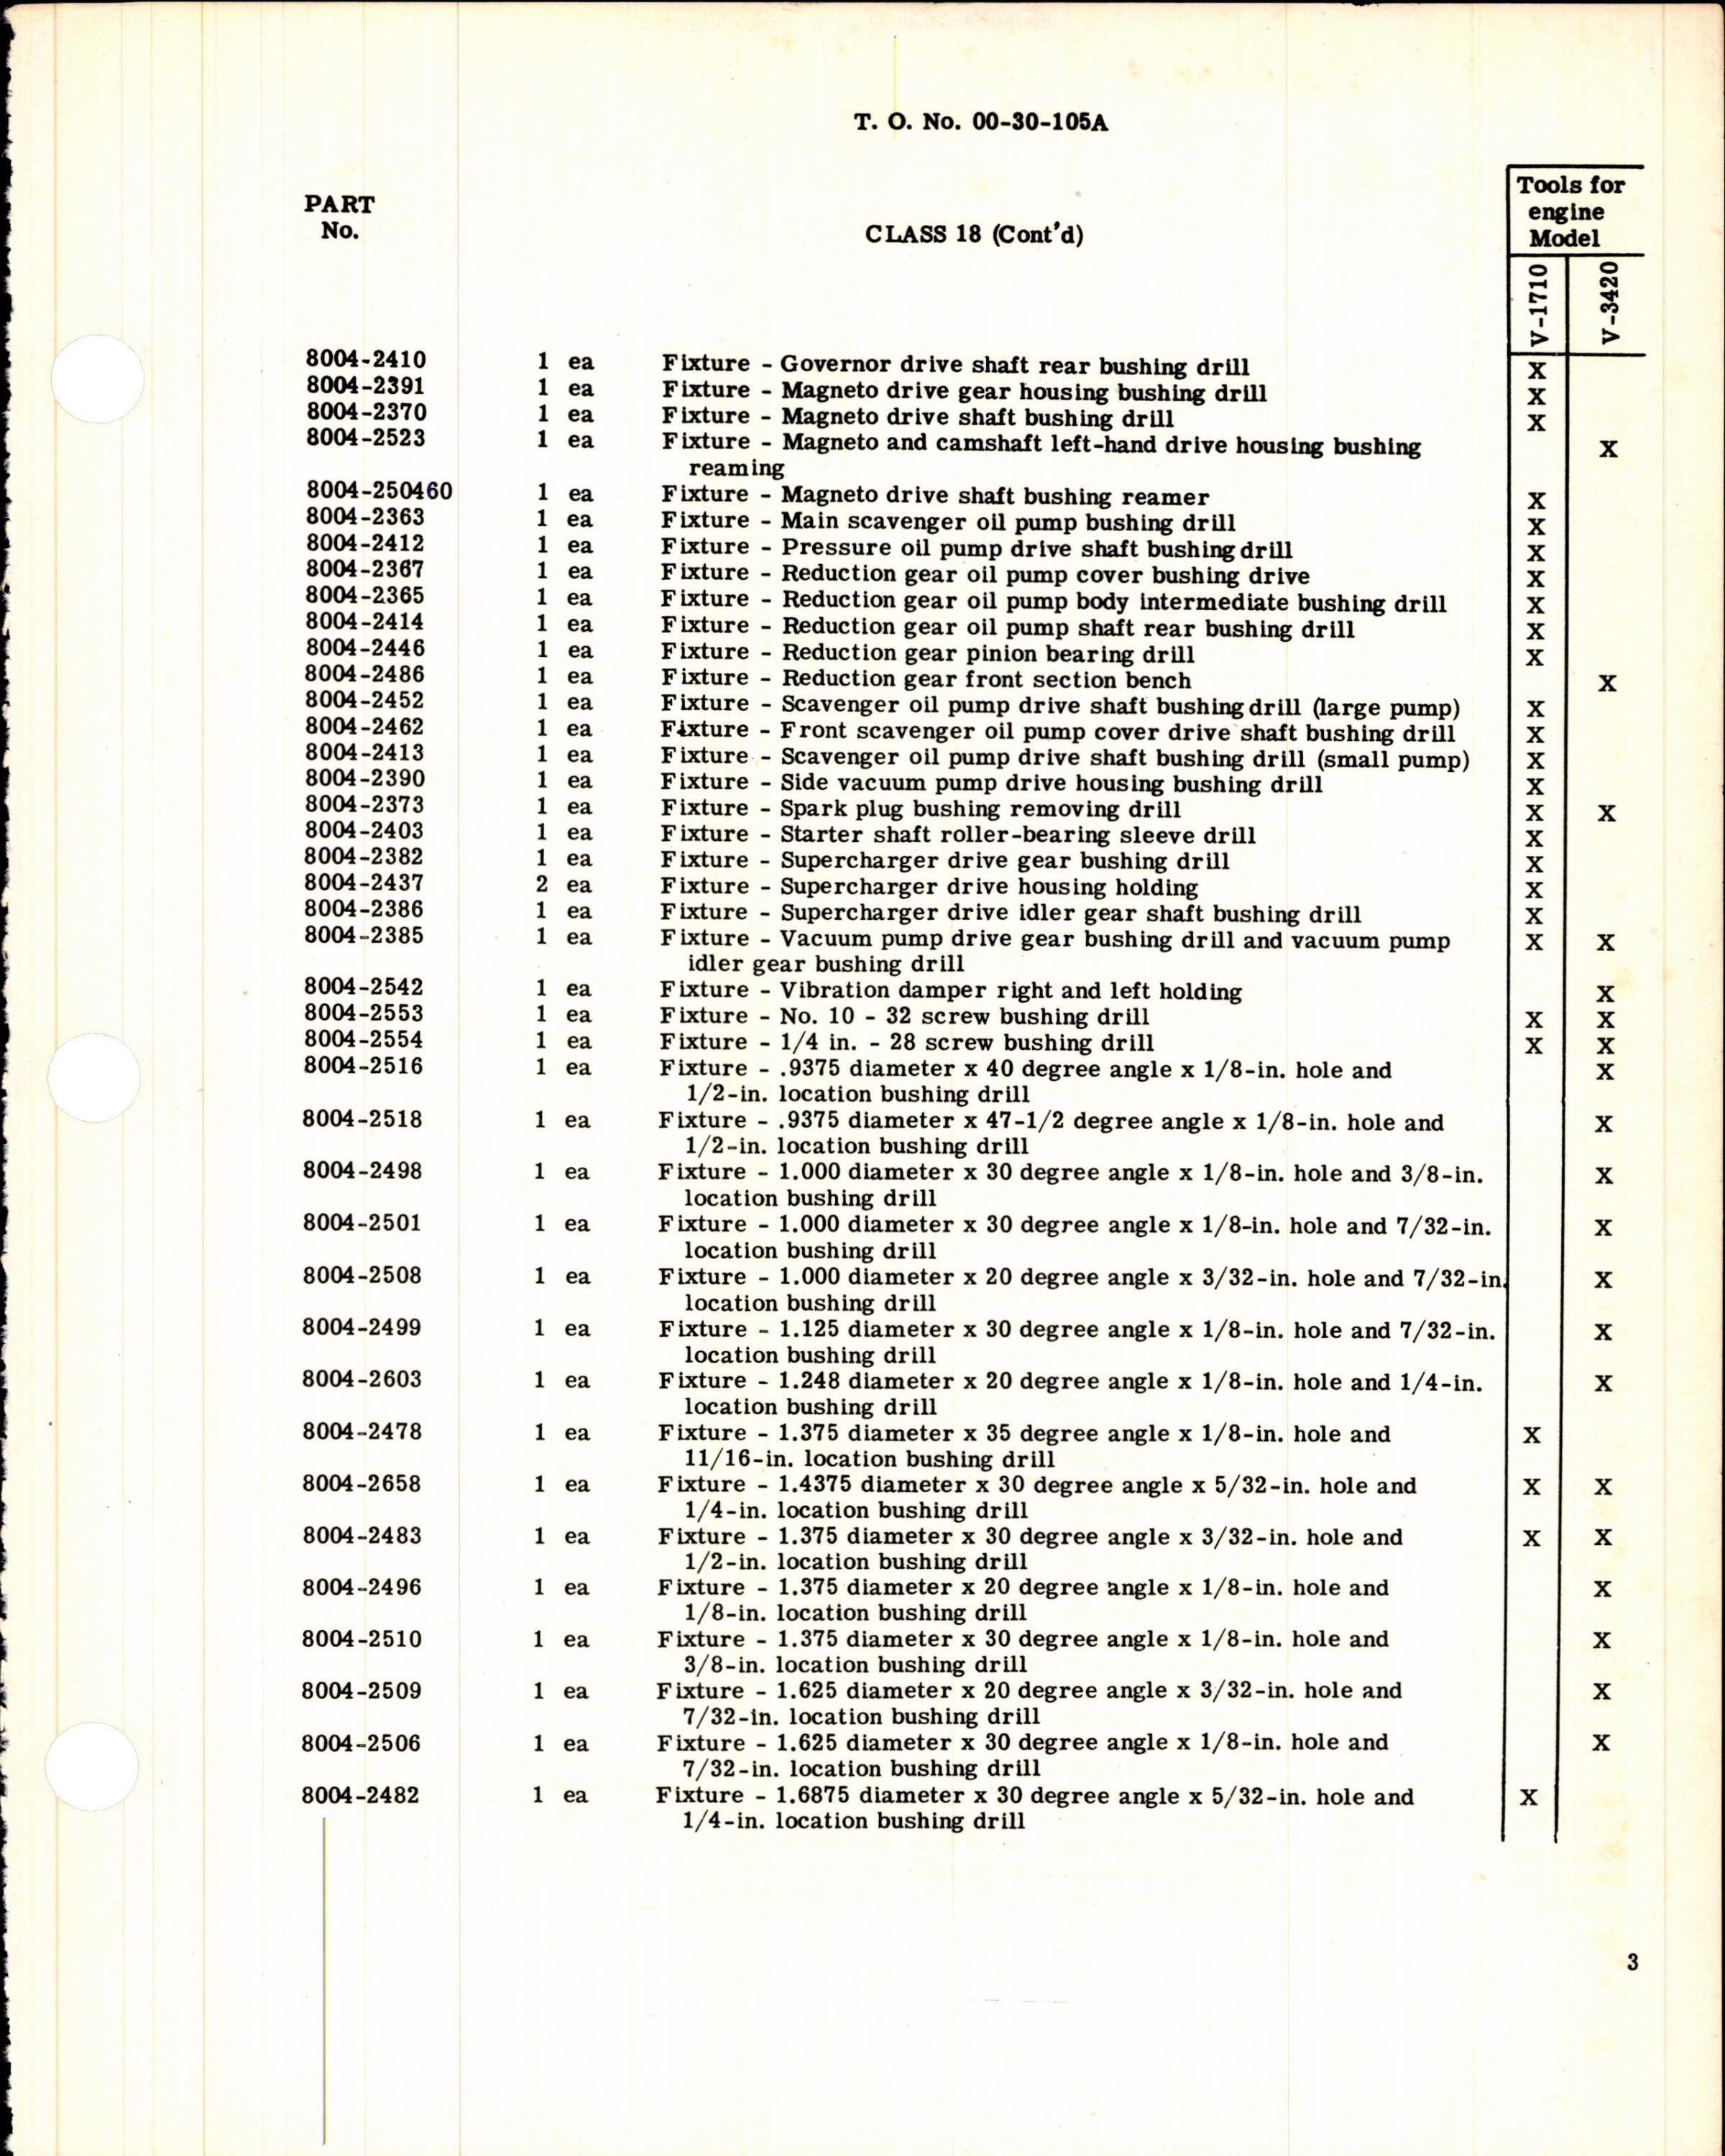 Sample page 3 from AirCorps Library document: Equipment Set, Special Tools, and Fixtures for Overhaul of V-1710 and V-3420 Allison Engines